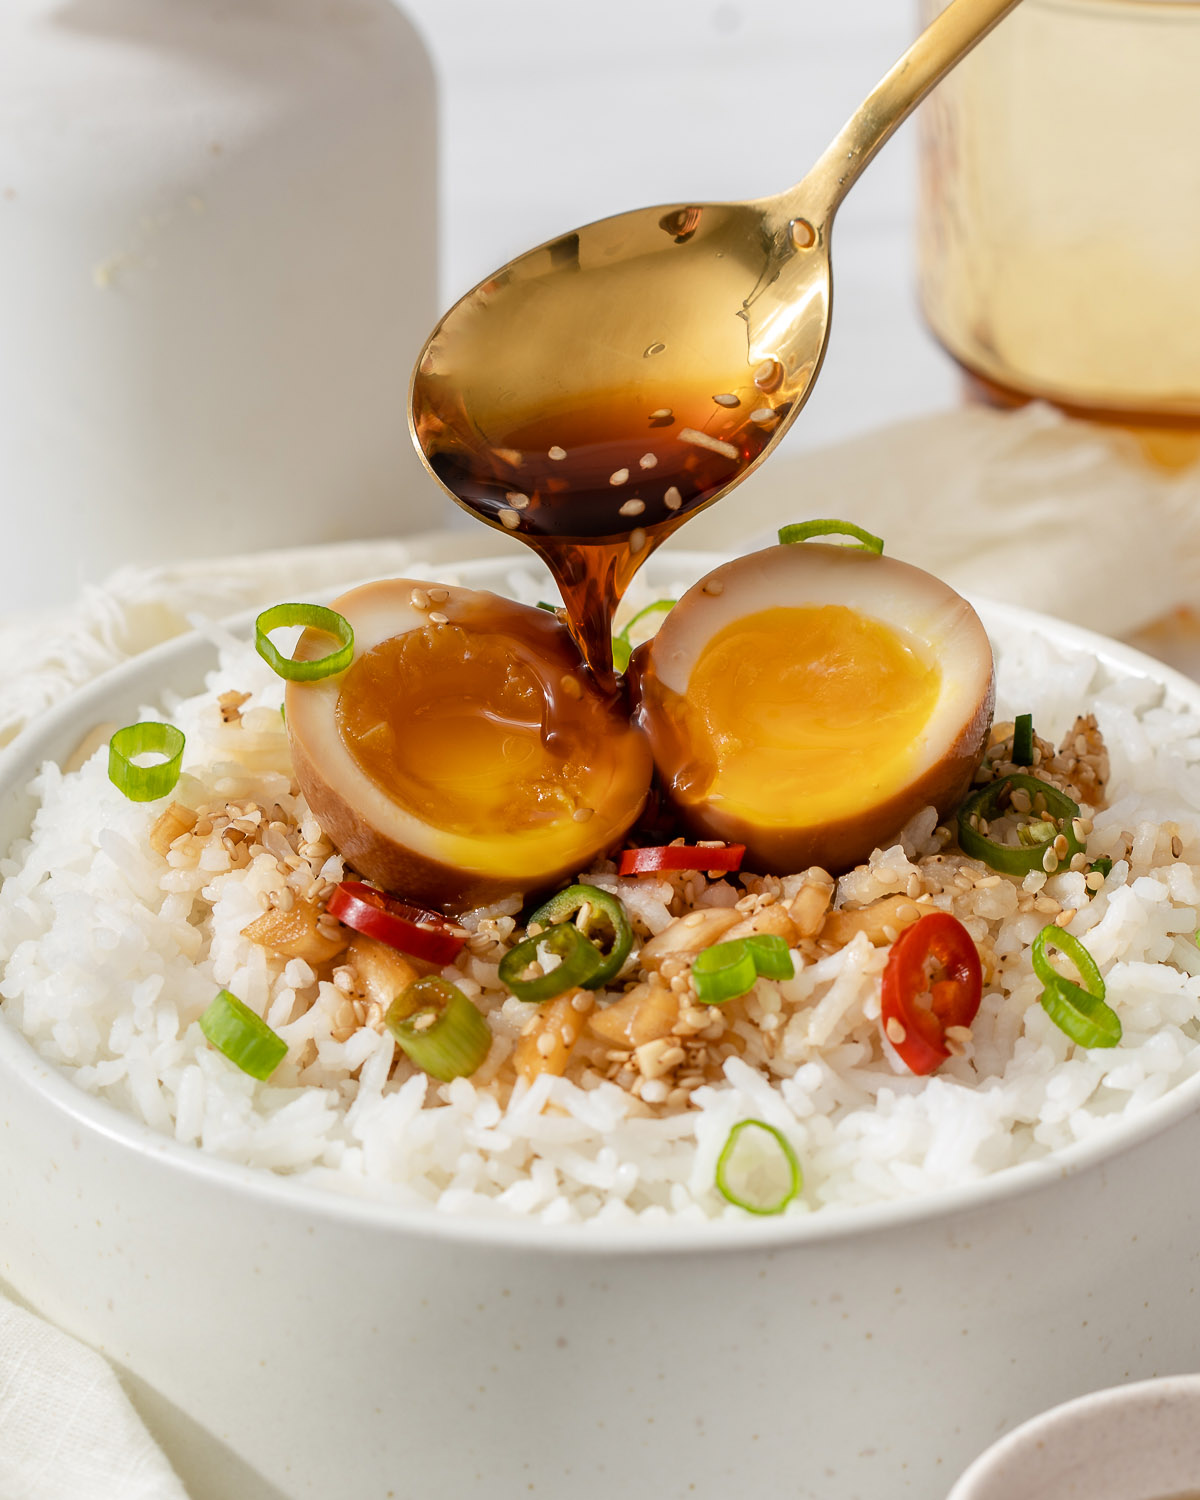 Pouring sauce onto a sliced open mayak egg on rice.